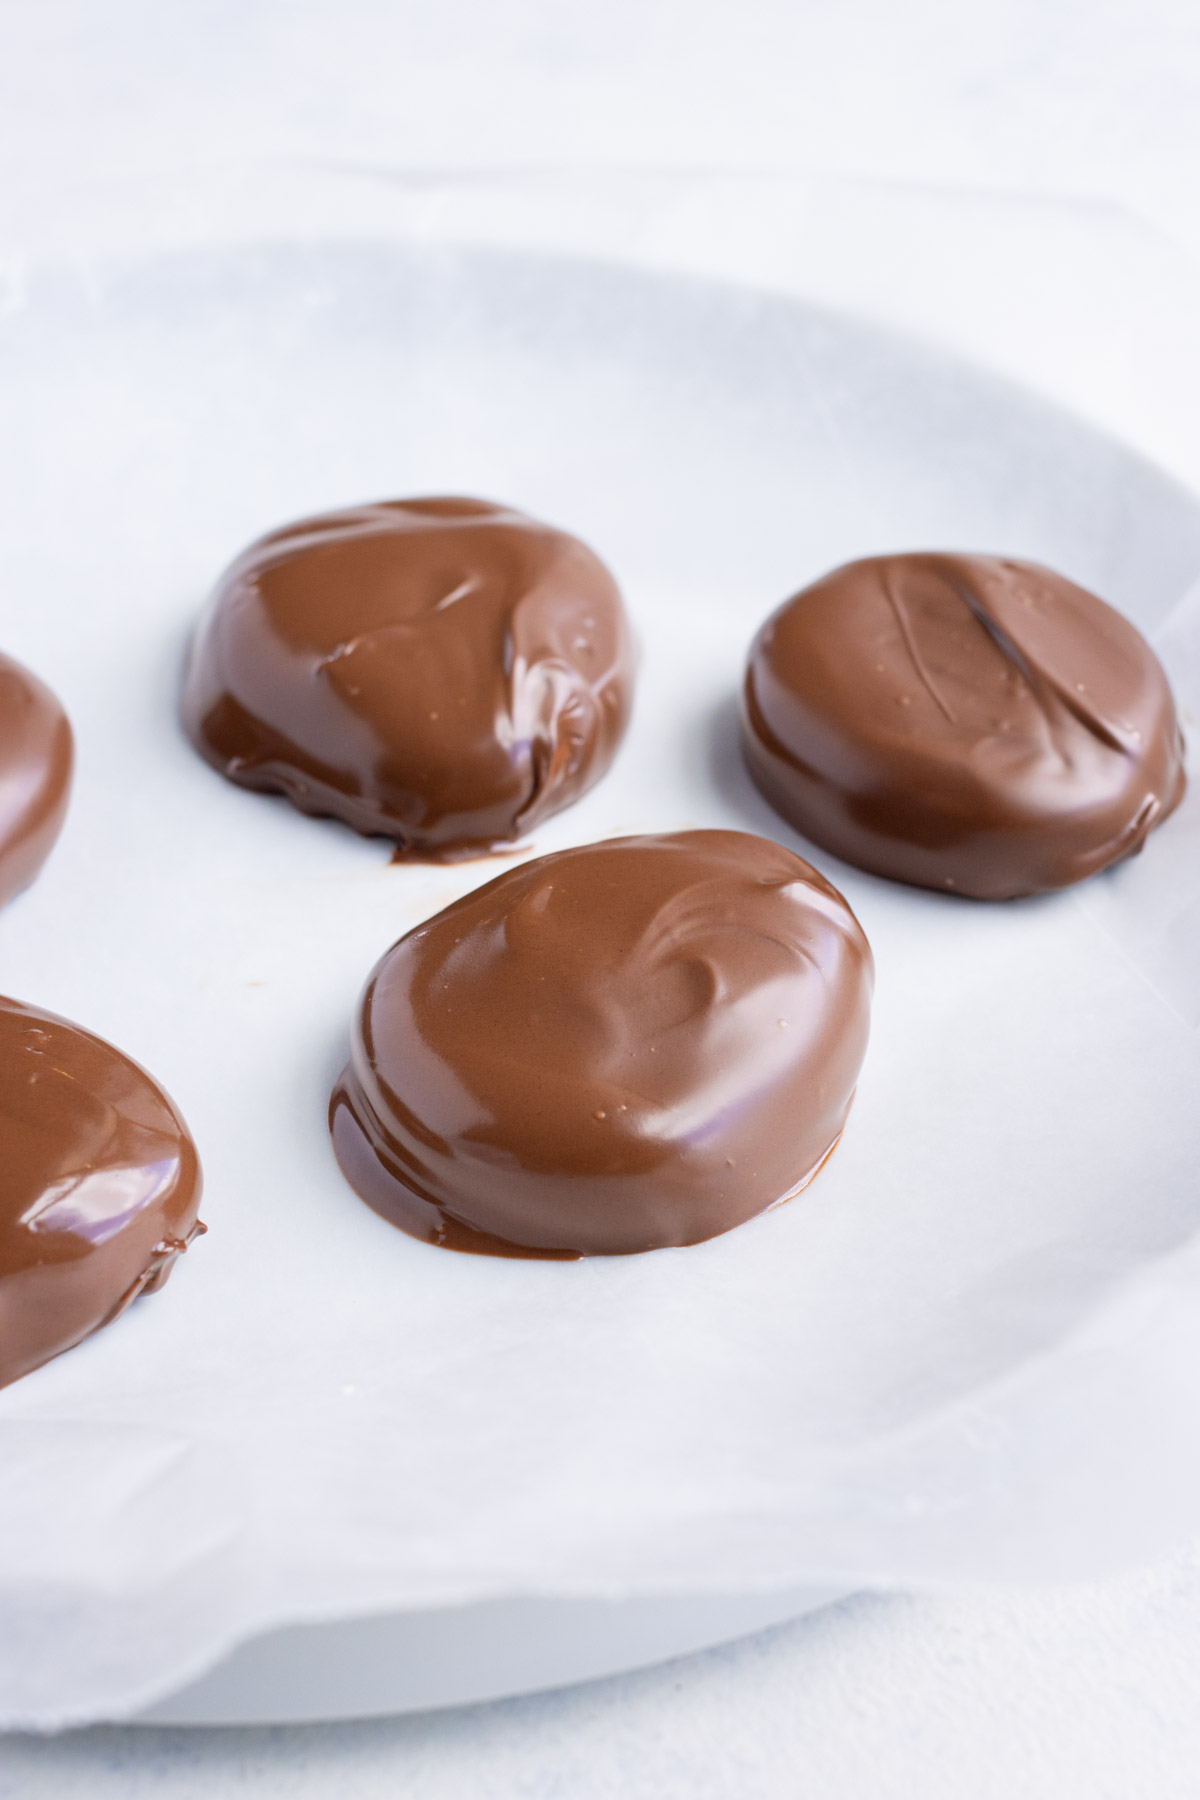 Chocolate peanut butter eggs are laid on wax paper to set.